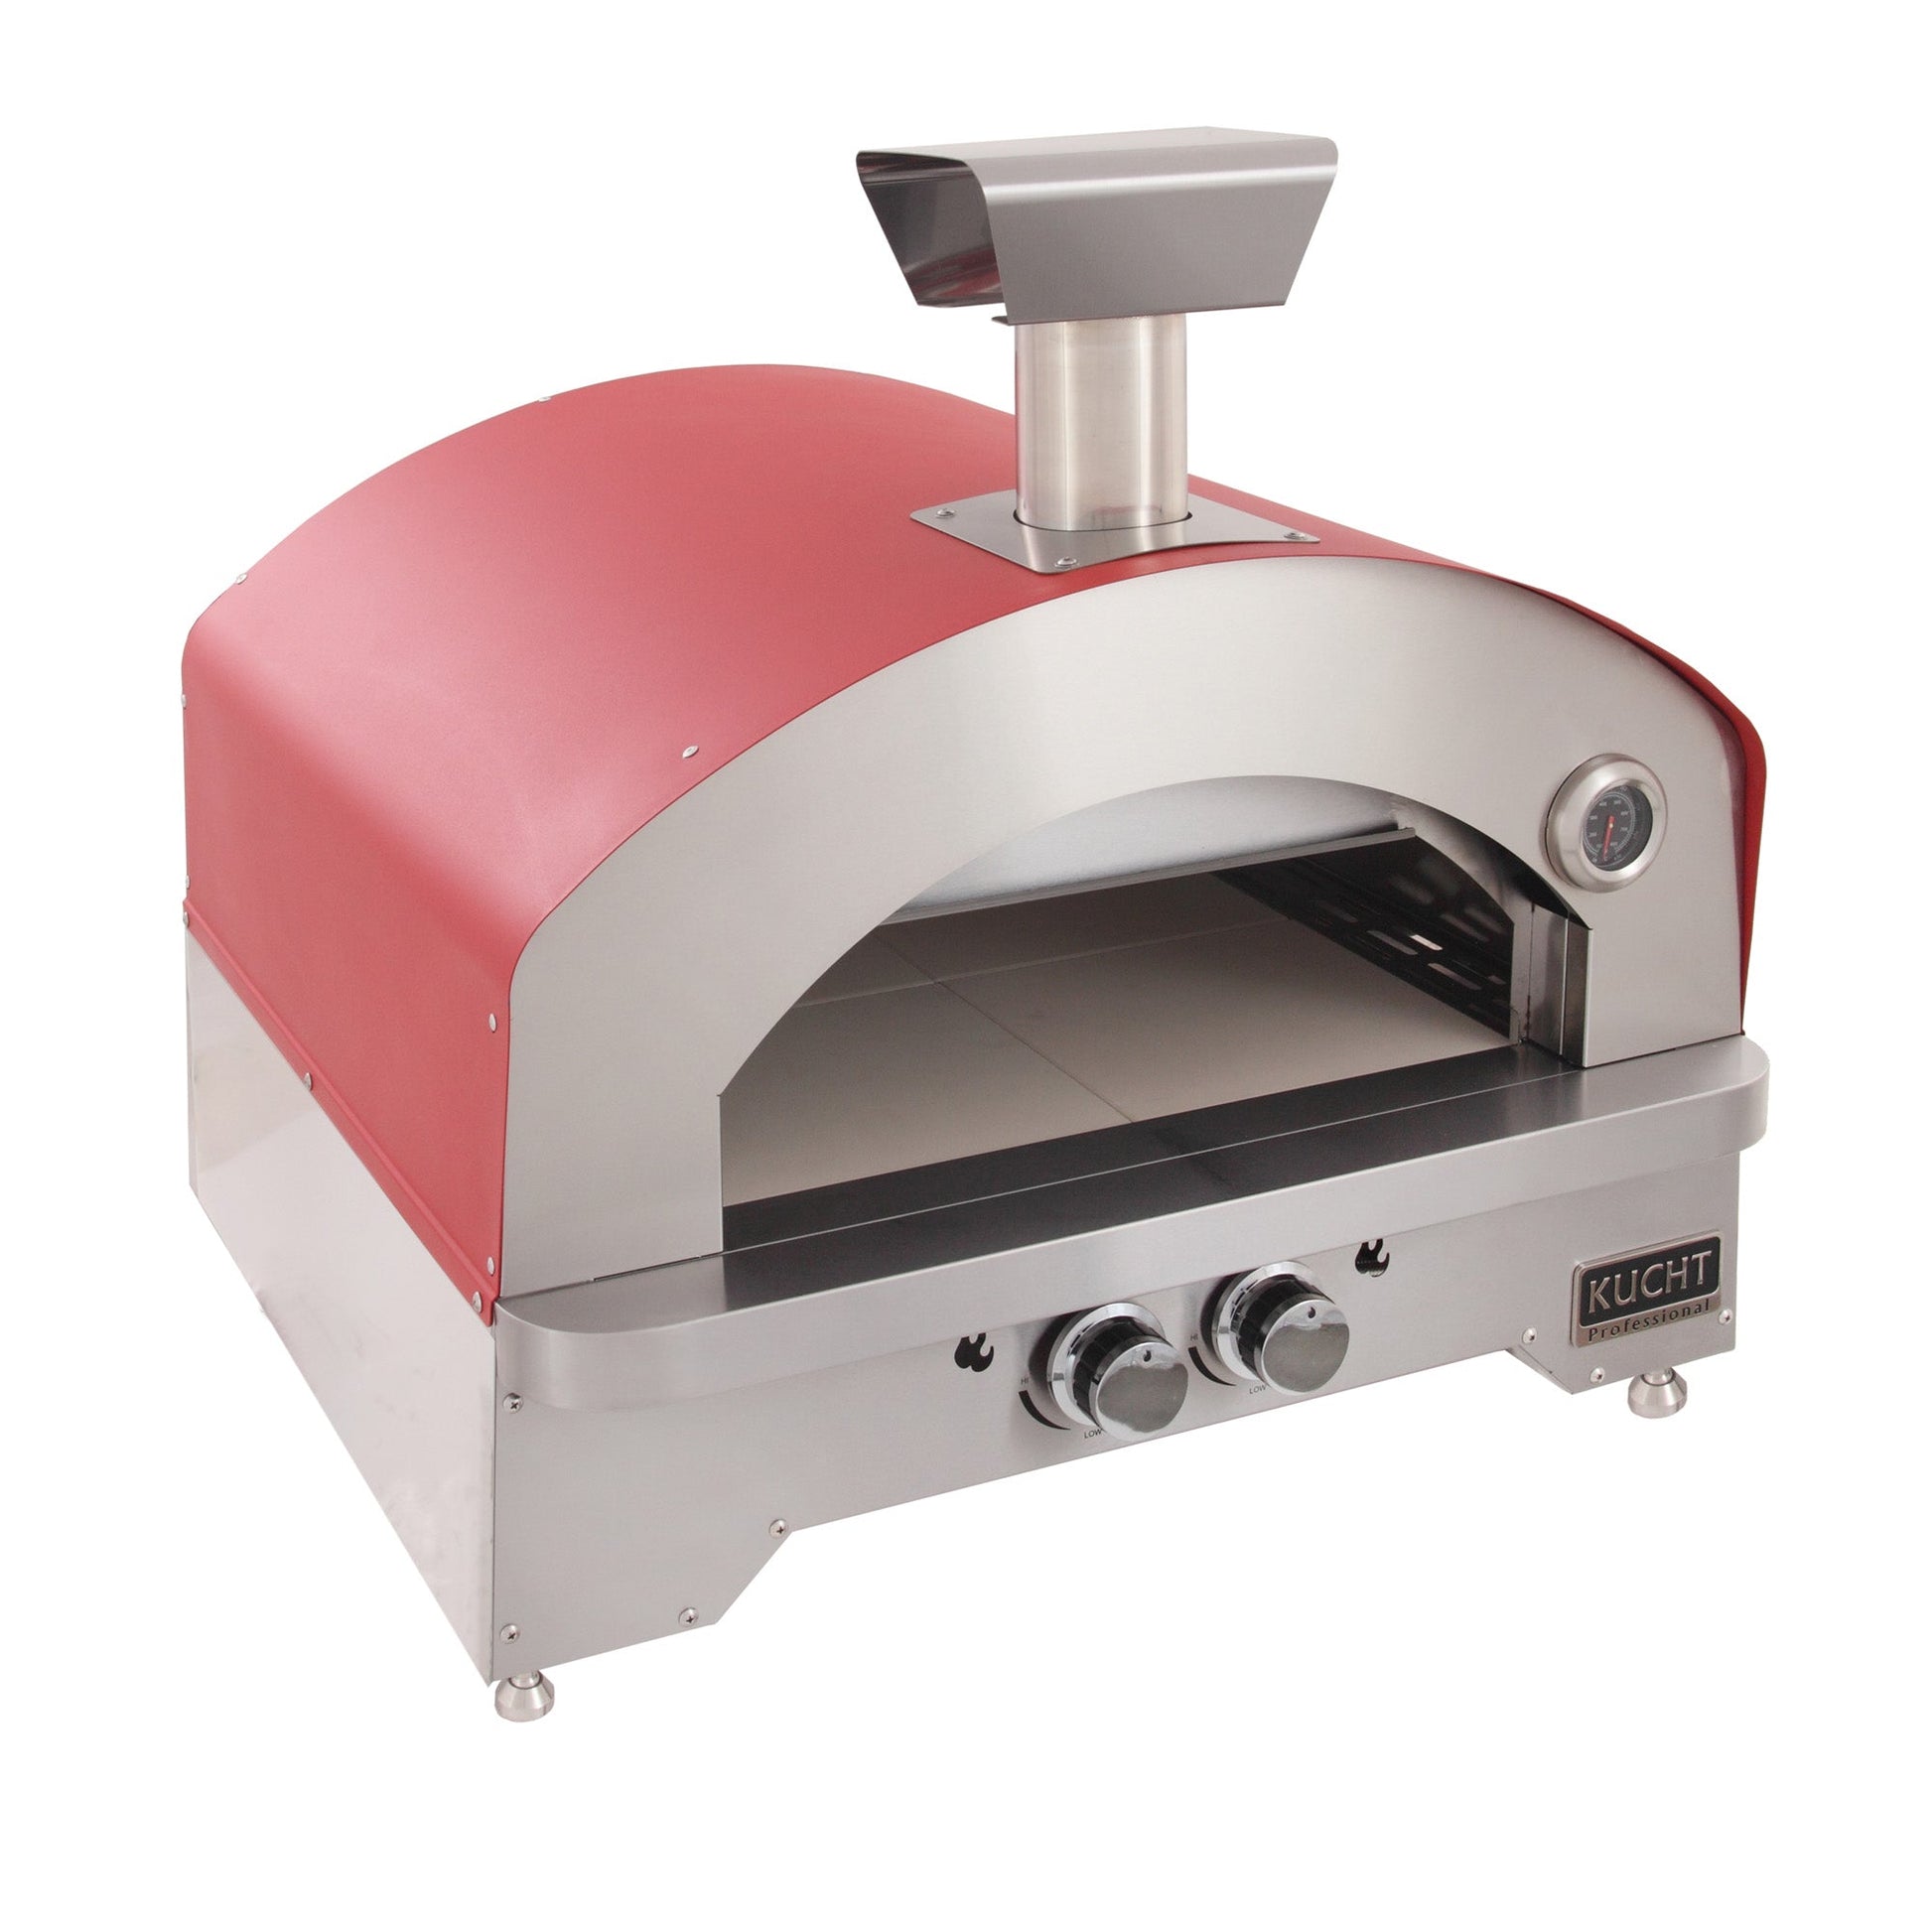 Kucht Napoli Red Propane Gas Countertop Pizza Oven With All-Weather Cover